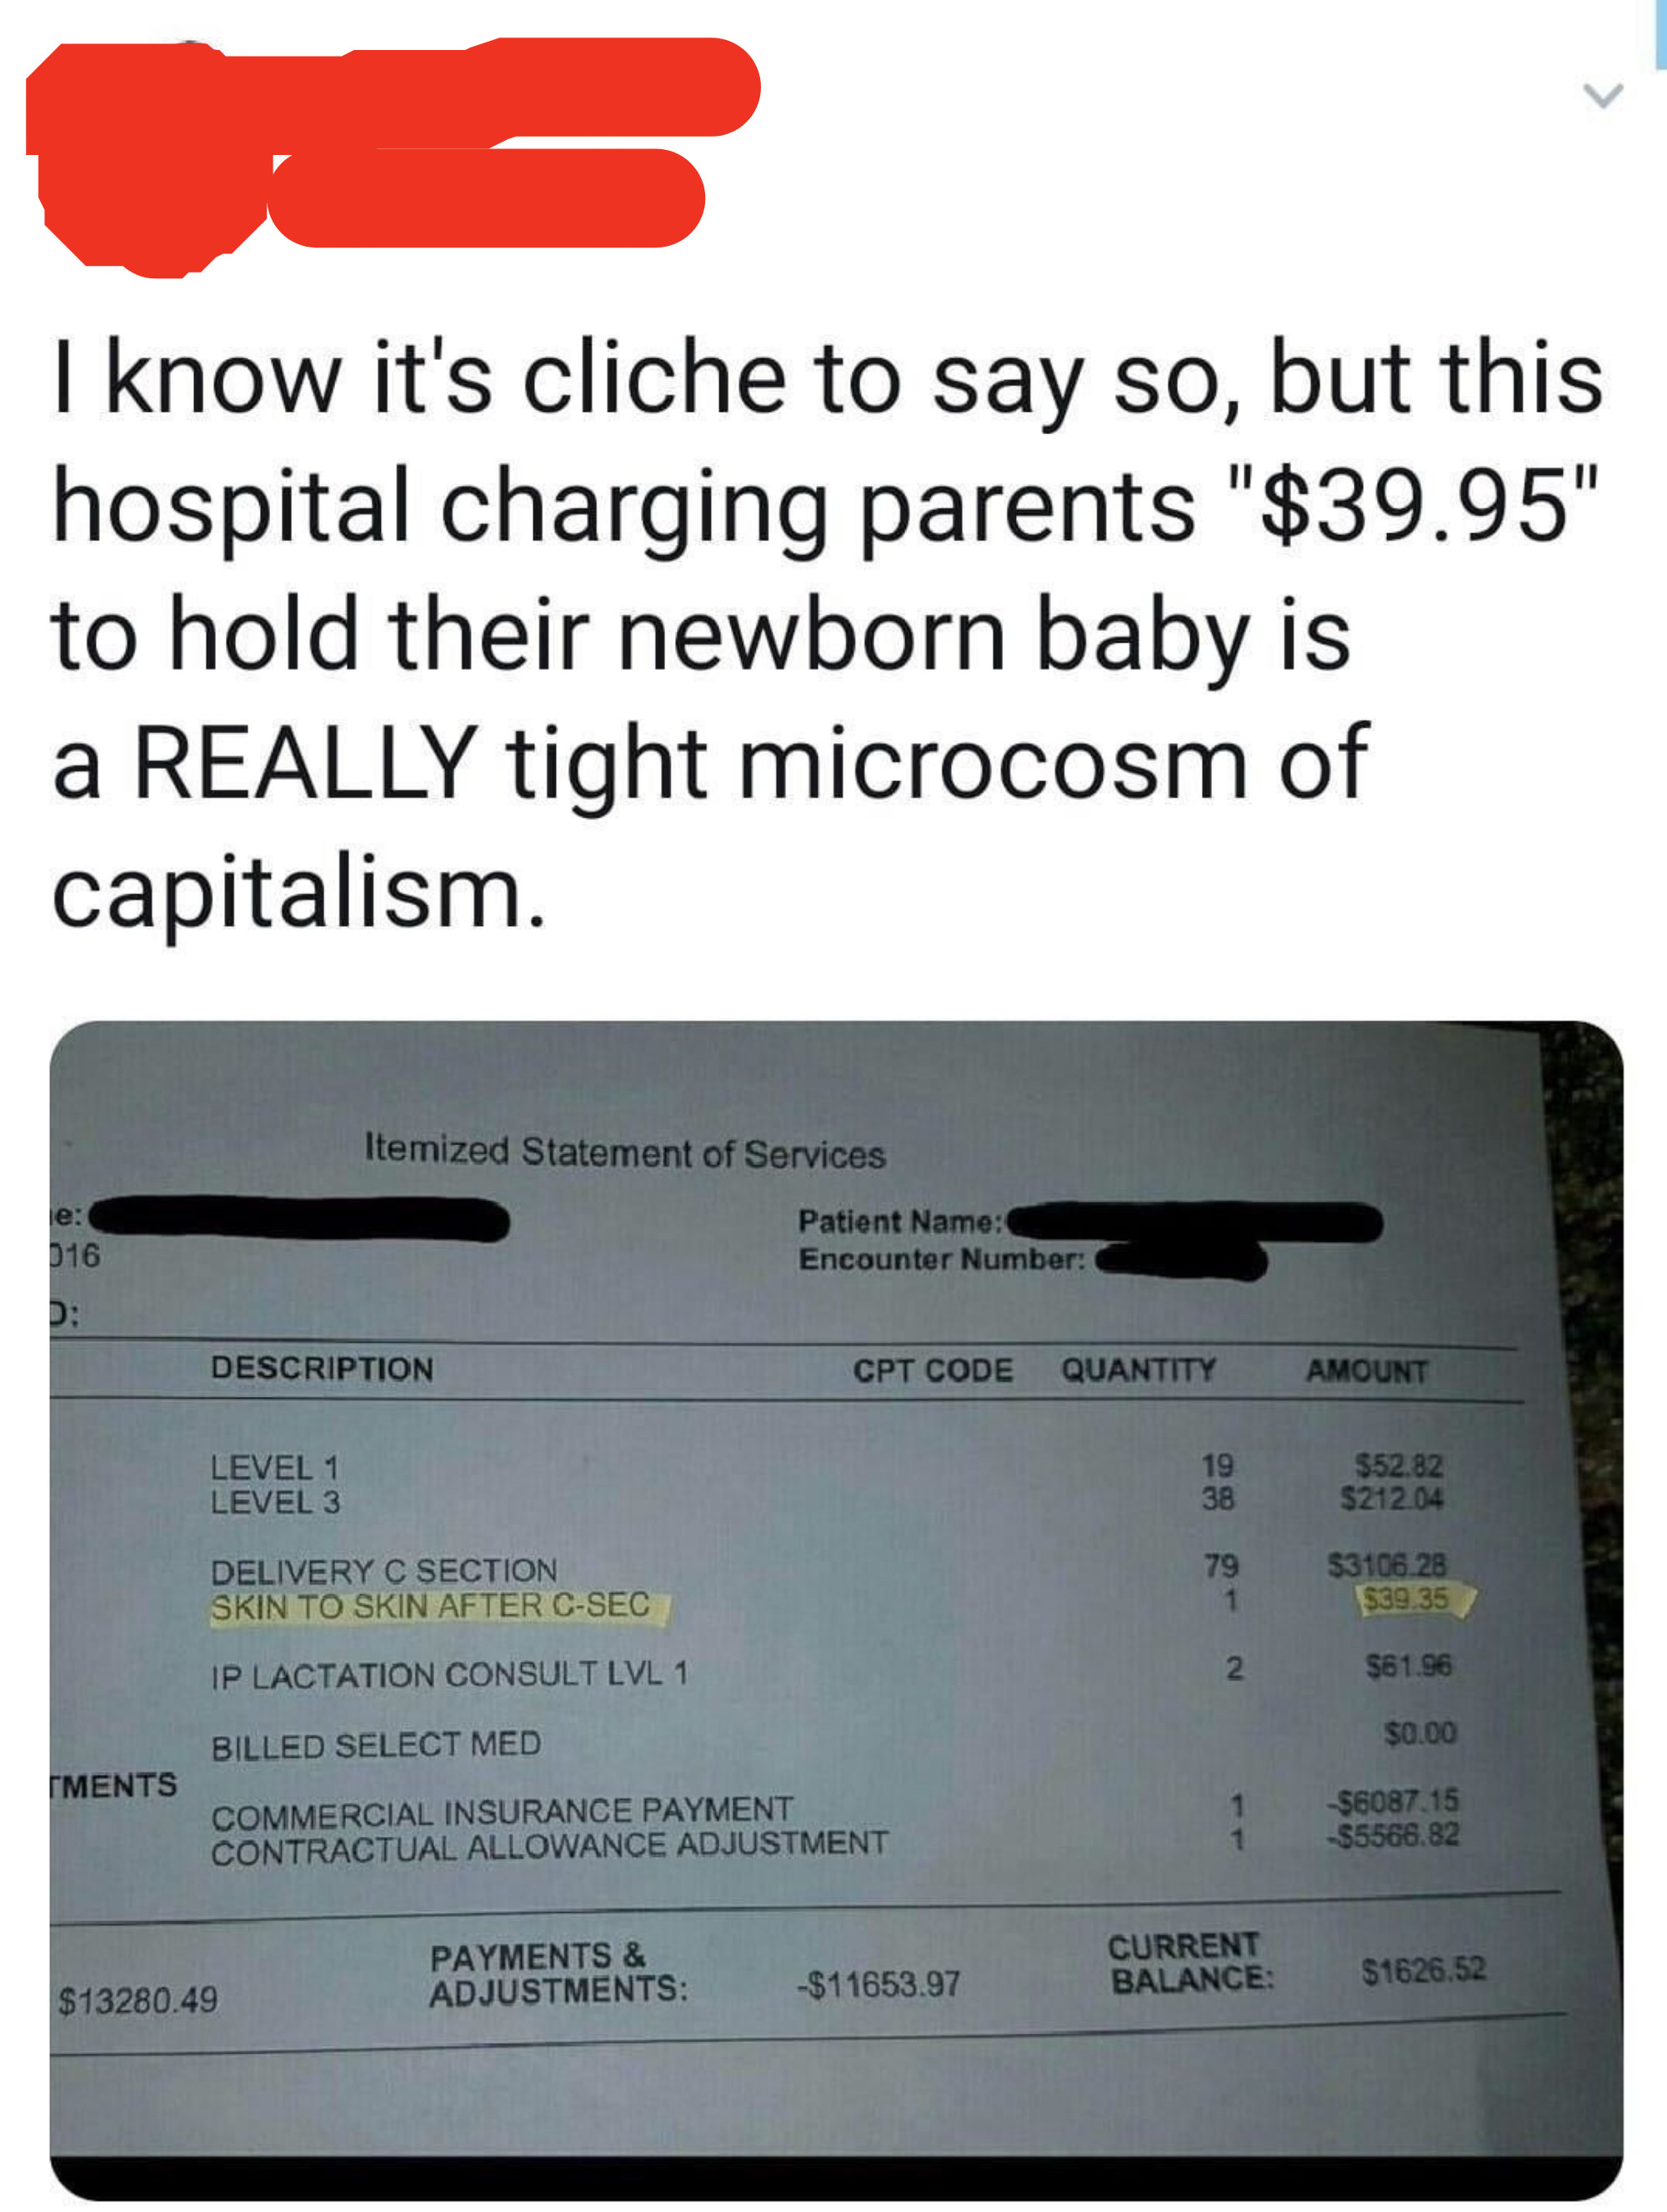 Tweet: &quot;I know it&#x27;s cliche to say so, but this hospital charging patients $39.95 to hold their newborn baby is a REALLY tight microcosm of capitalism&quot; with a bill with a $39.35 charge for &quot;Skin to skin after C-section&quot;